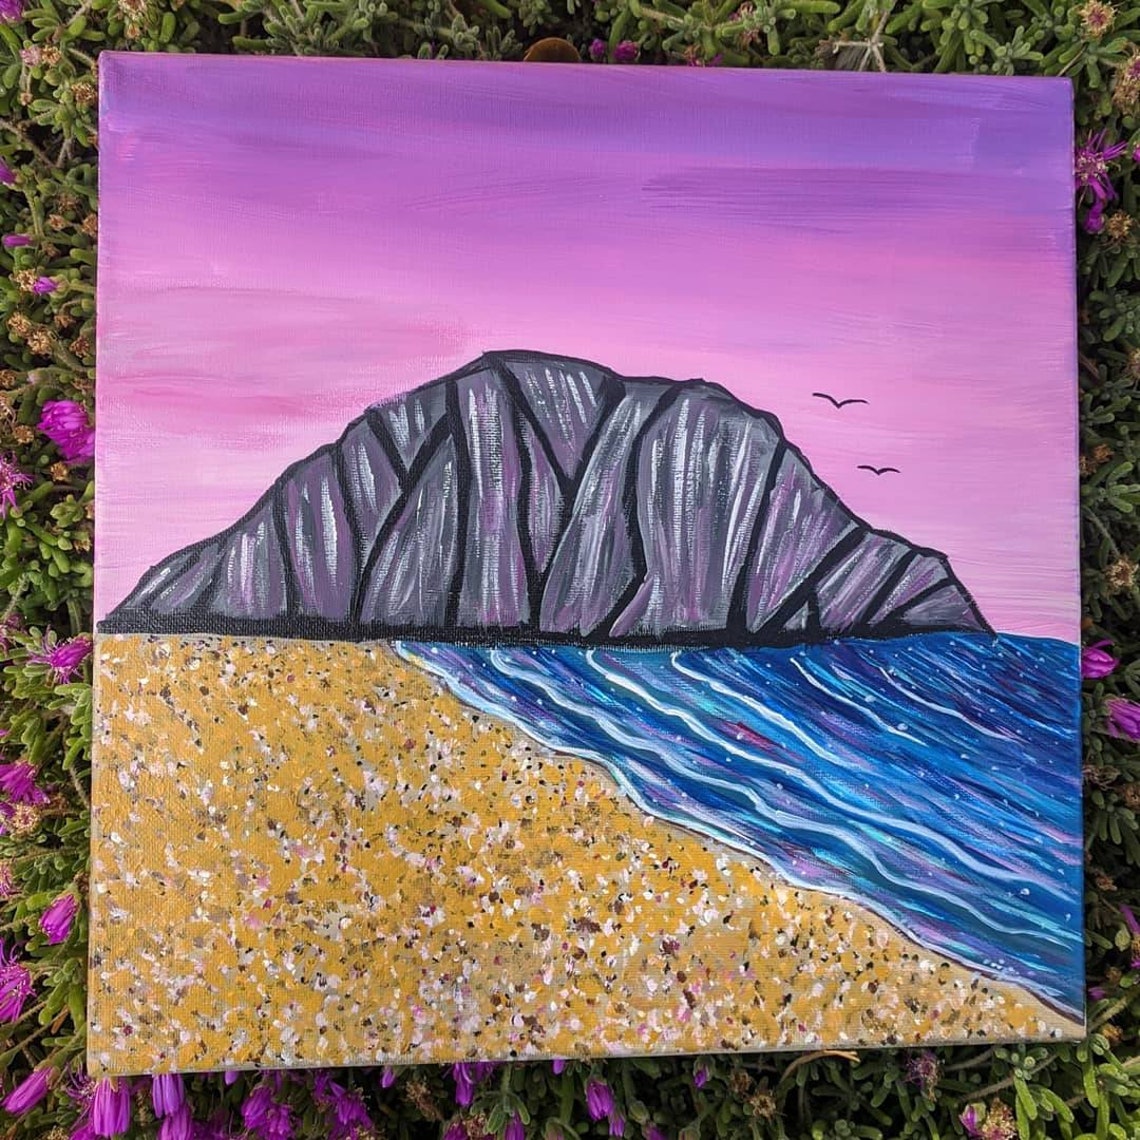 Morro Rock Made to Order | Etsy